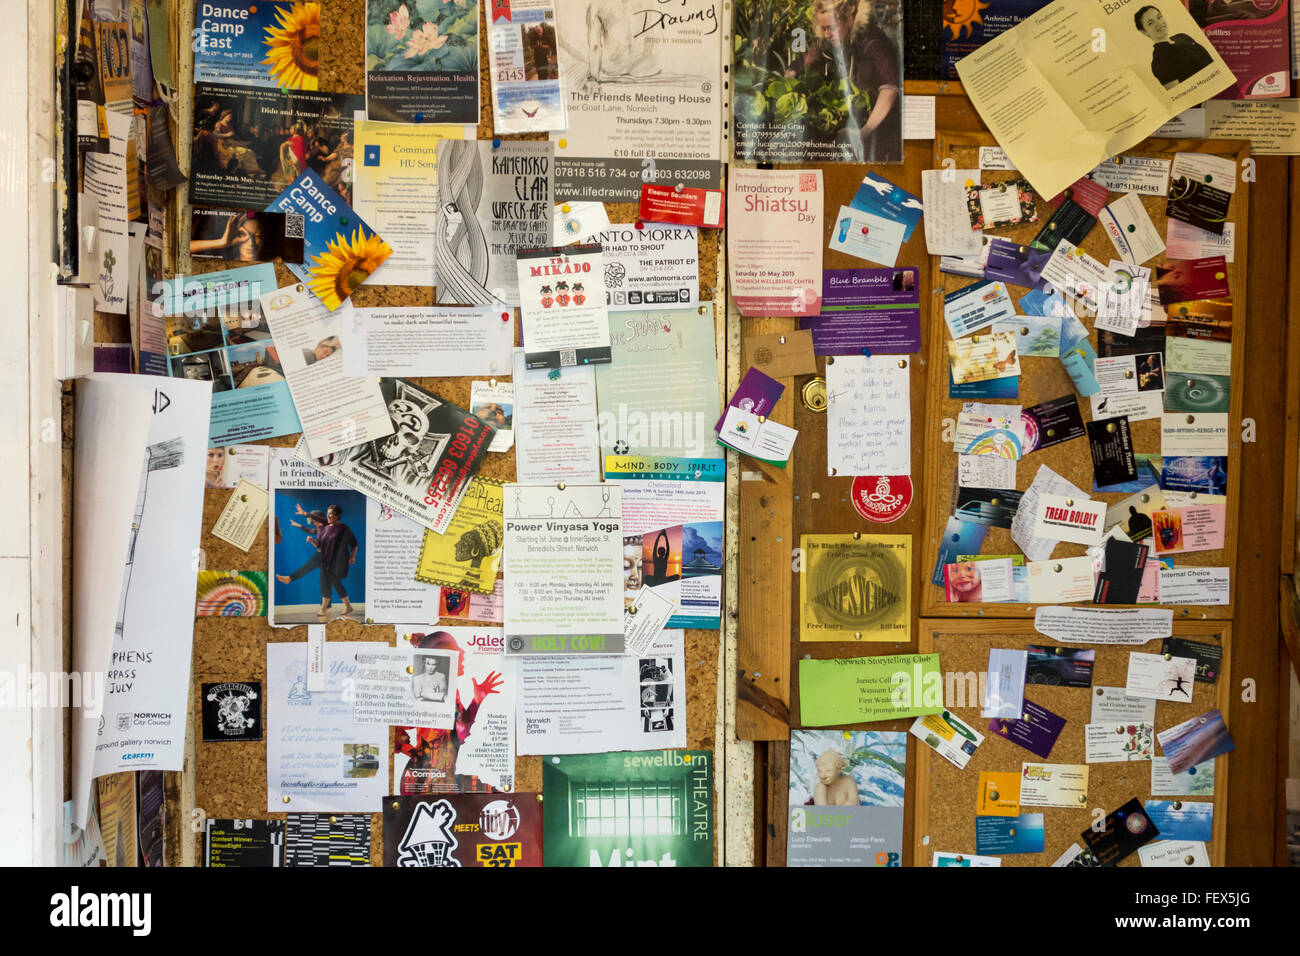 Chaotic display of business adverts on a noticeboard, UK Stock Photo